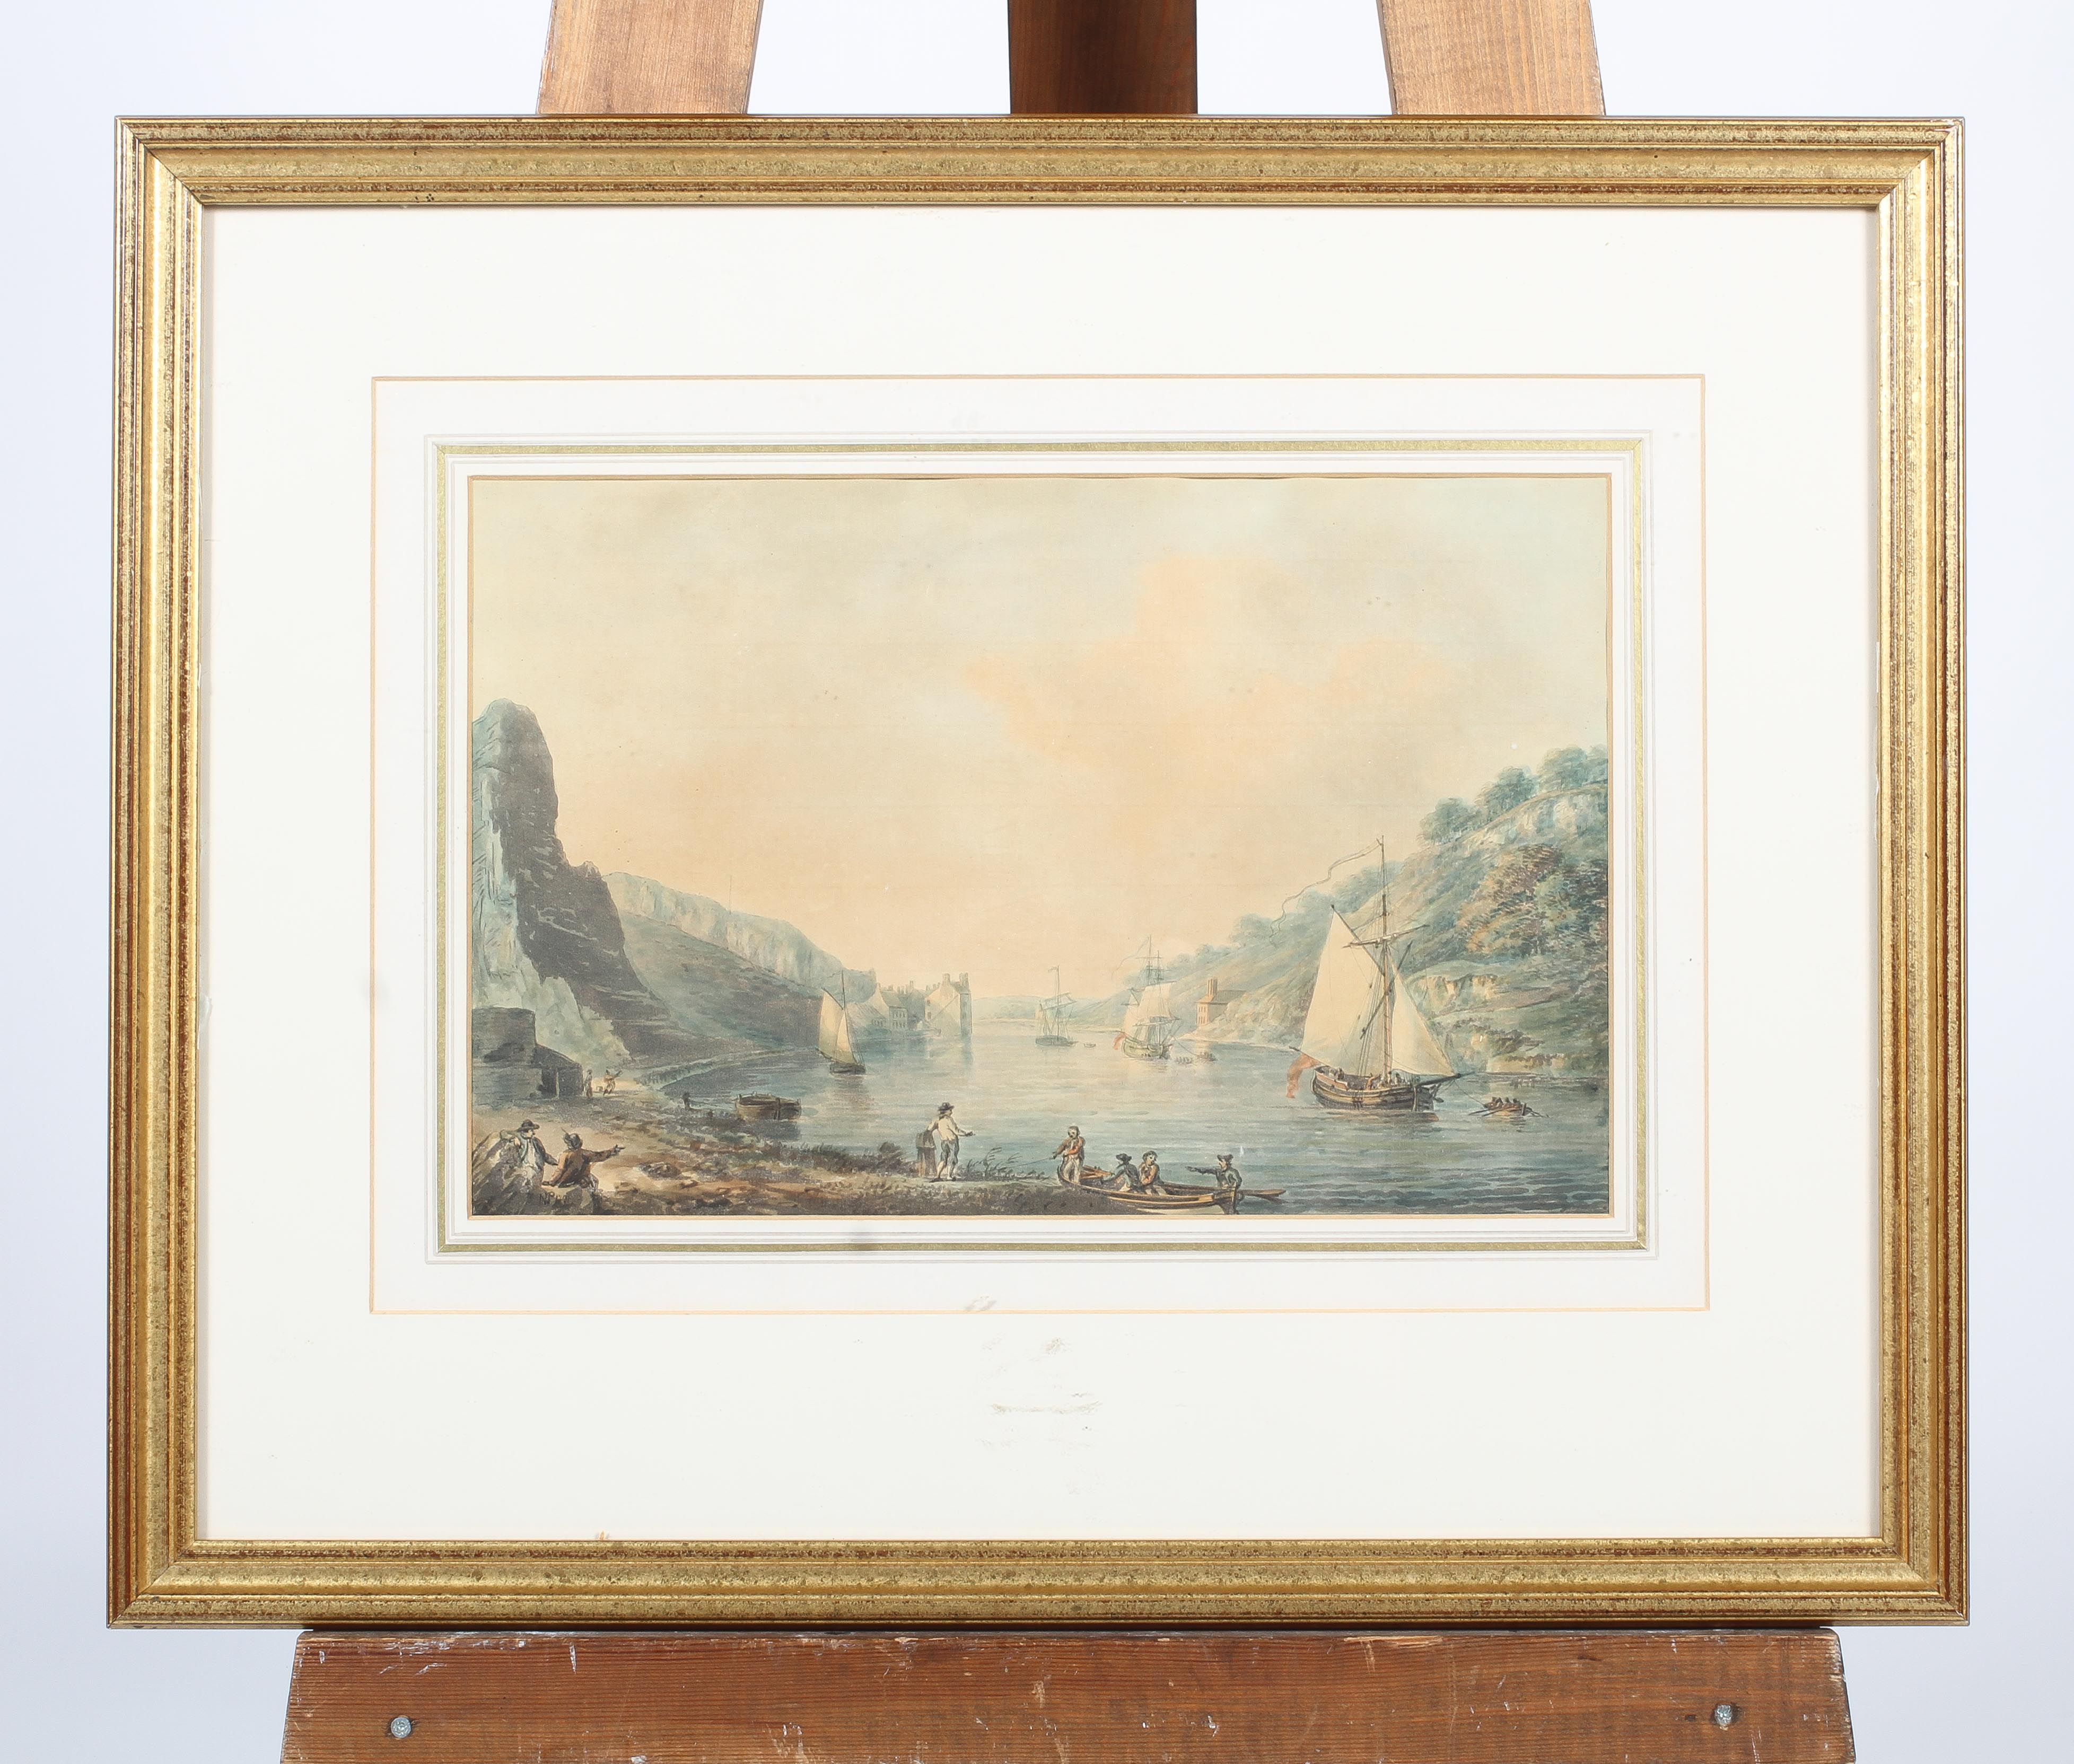 Nicholas Pocock, hand coloured print, 'Avon Gorge', signed and indistinctly dated lower left, - Image 2 of 8